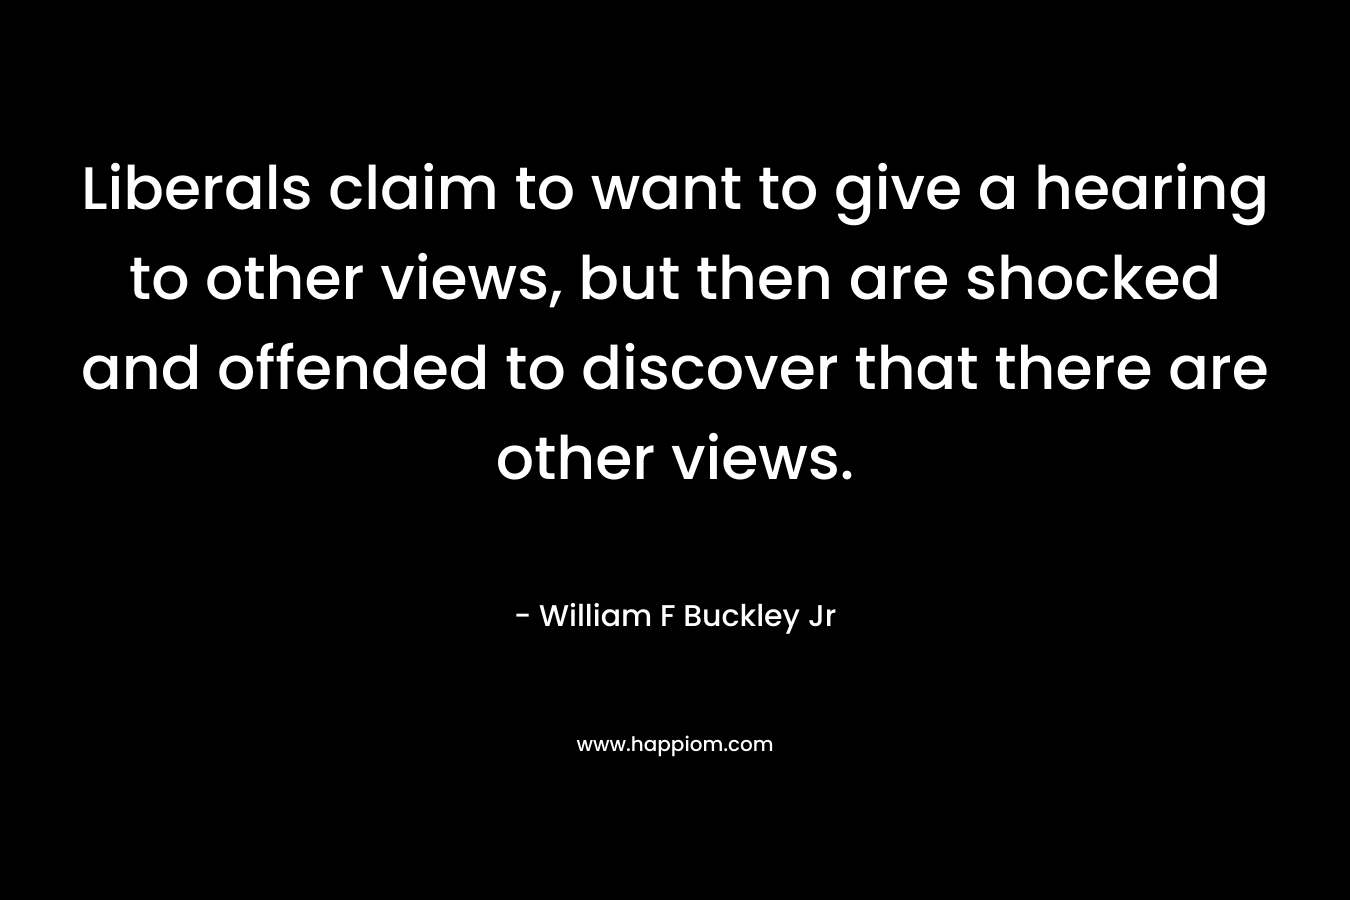 Liberals claim to want to give a hearing to other views, but then are shocked and offended to discover that there are other views. – William F Buckley Jr